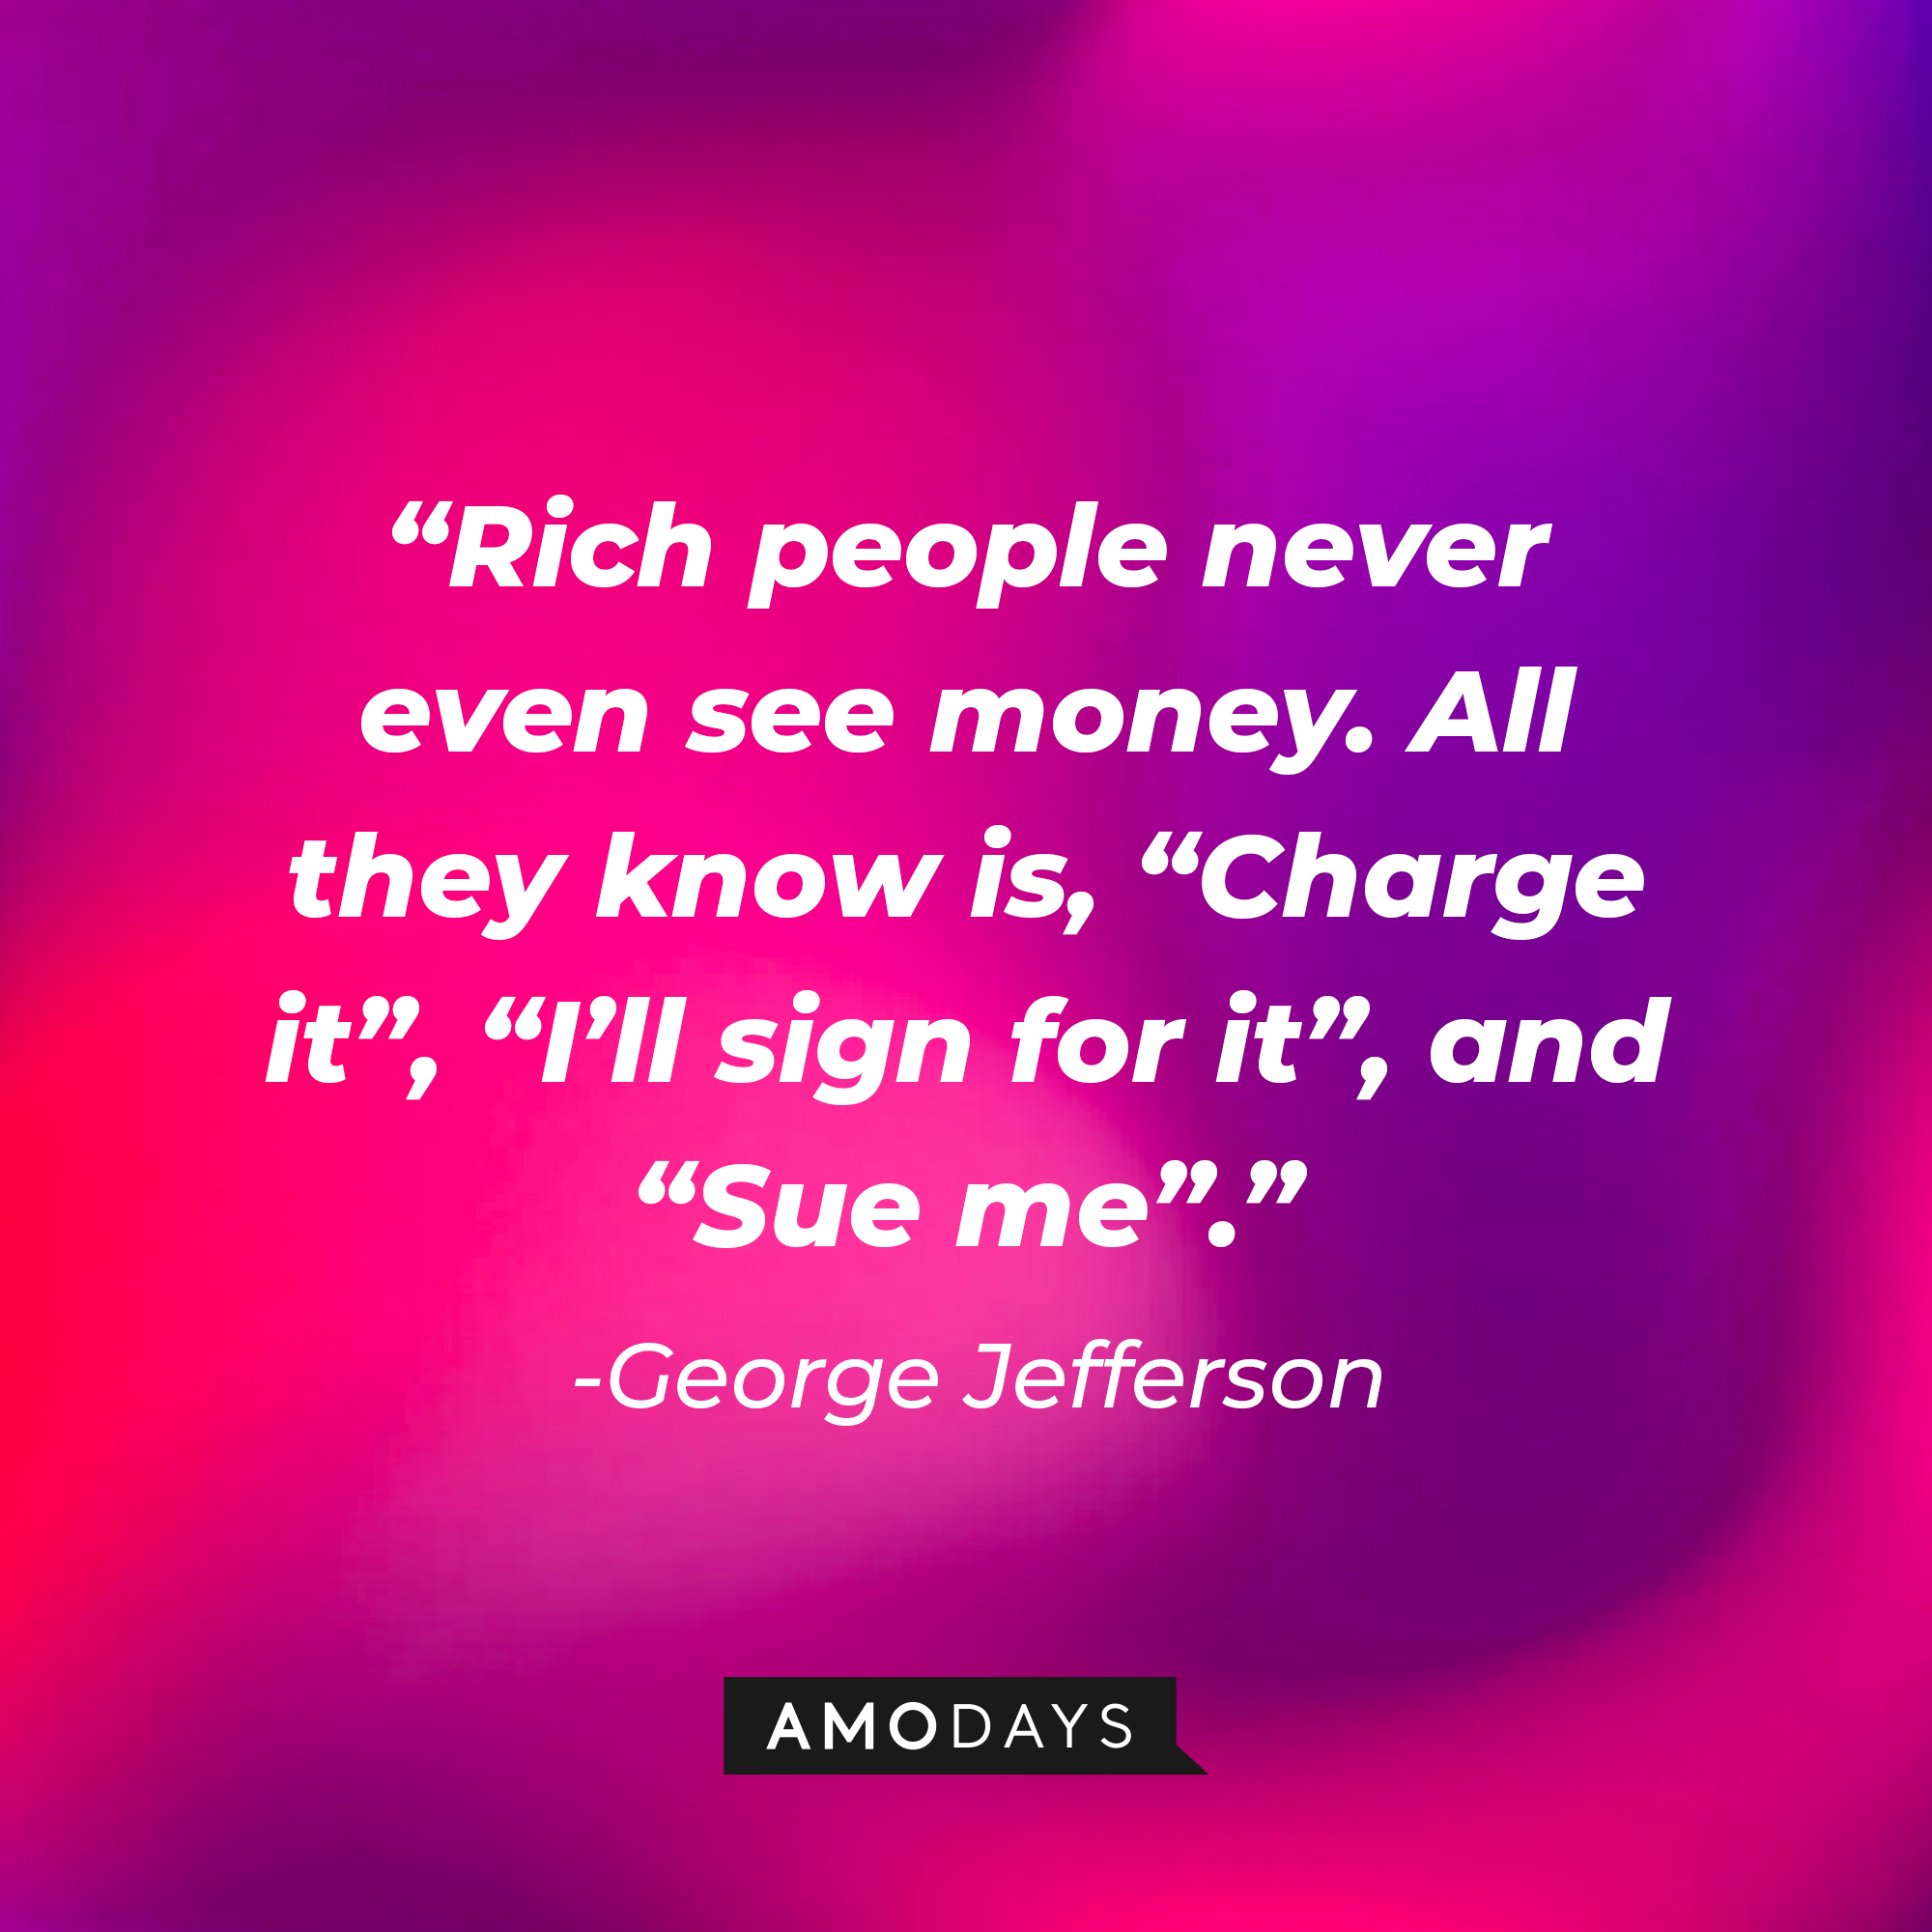 George Jefferson’s quote: “Rich people never even see money. All they know is, “Charge it”, “I’ll sign for it”, and “Sue me”.” | Source: AmoDays